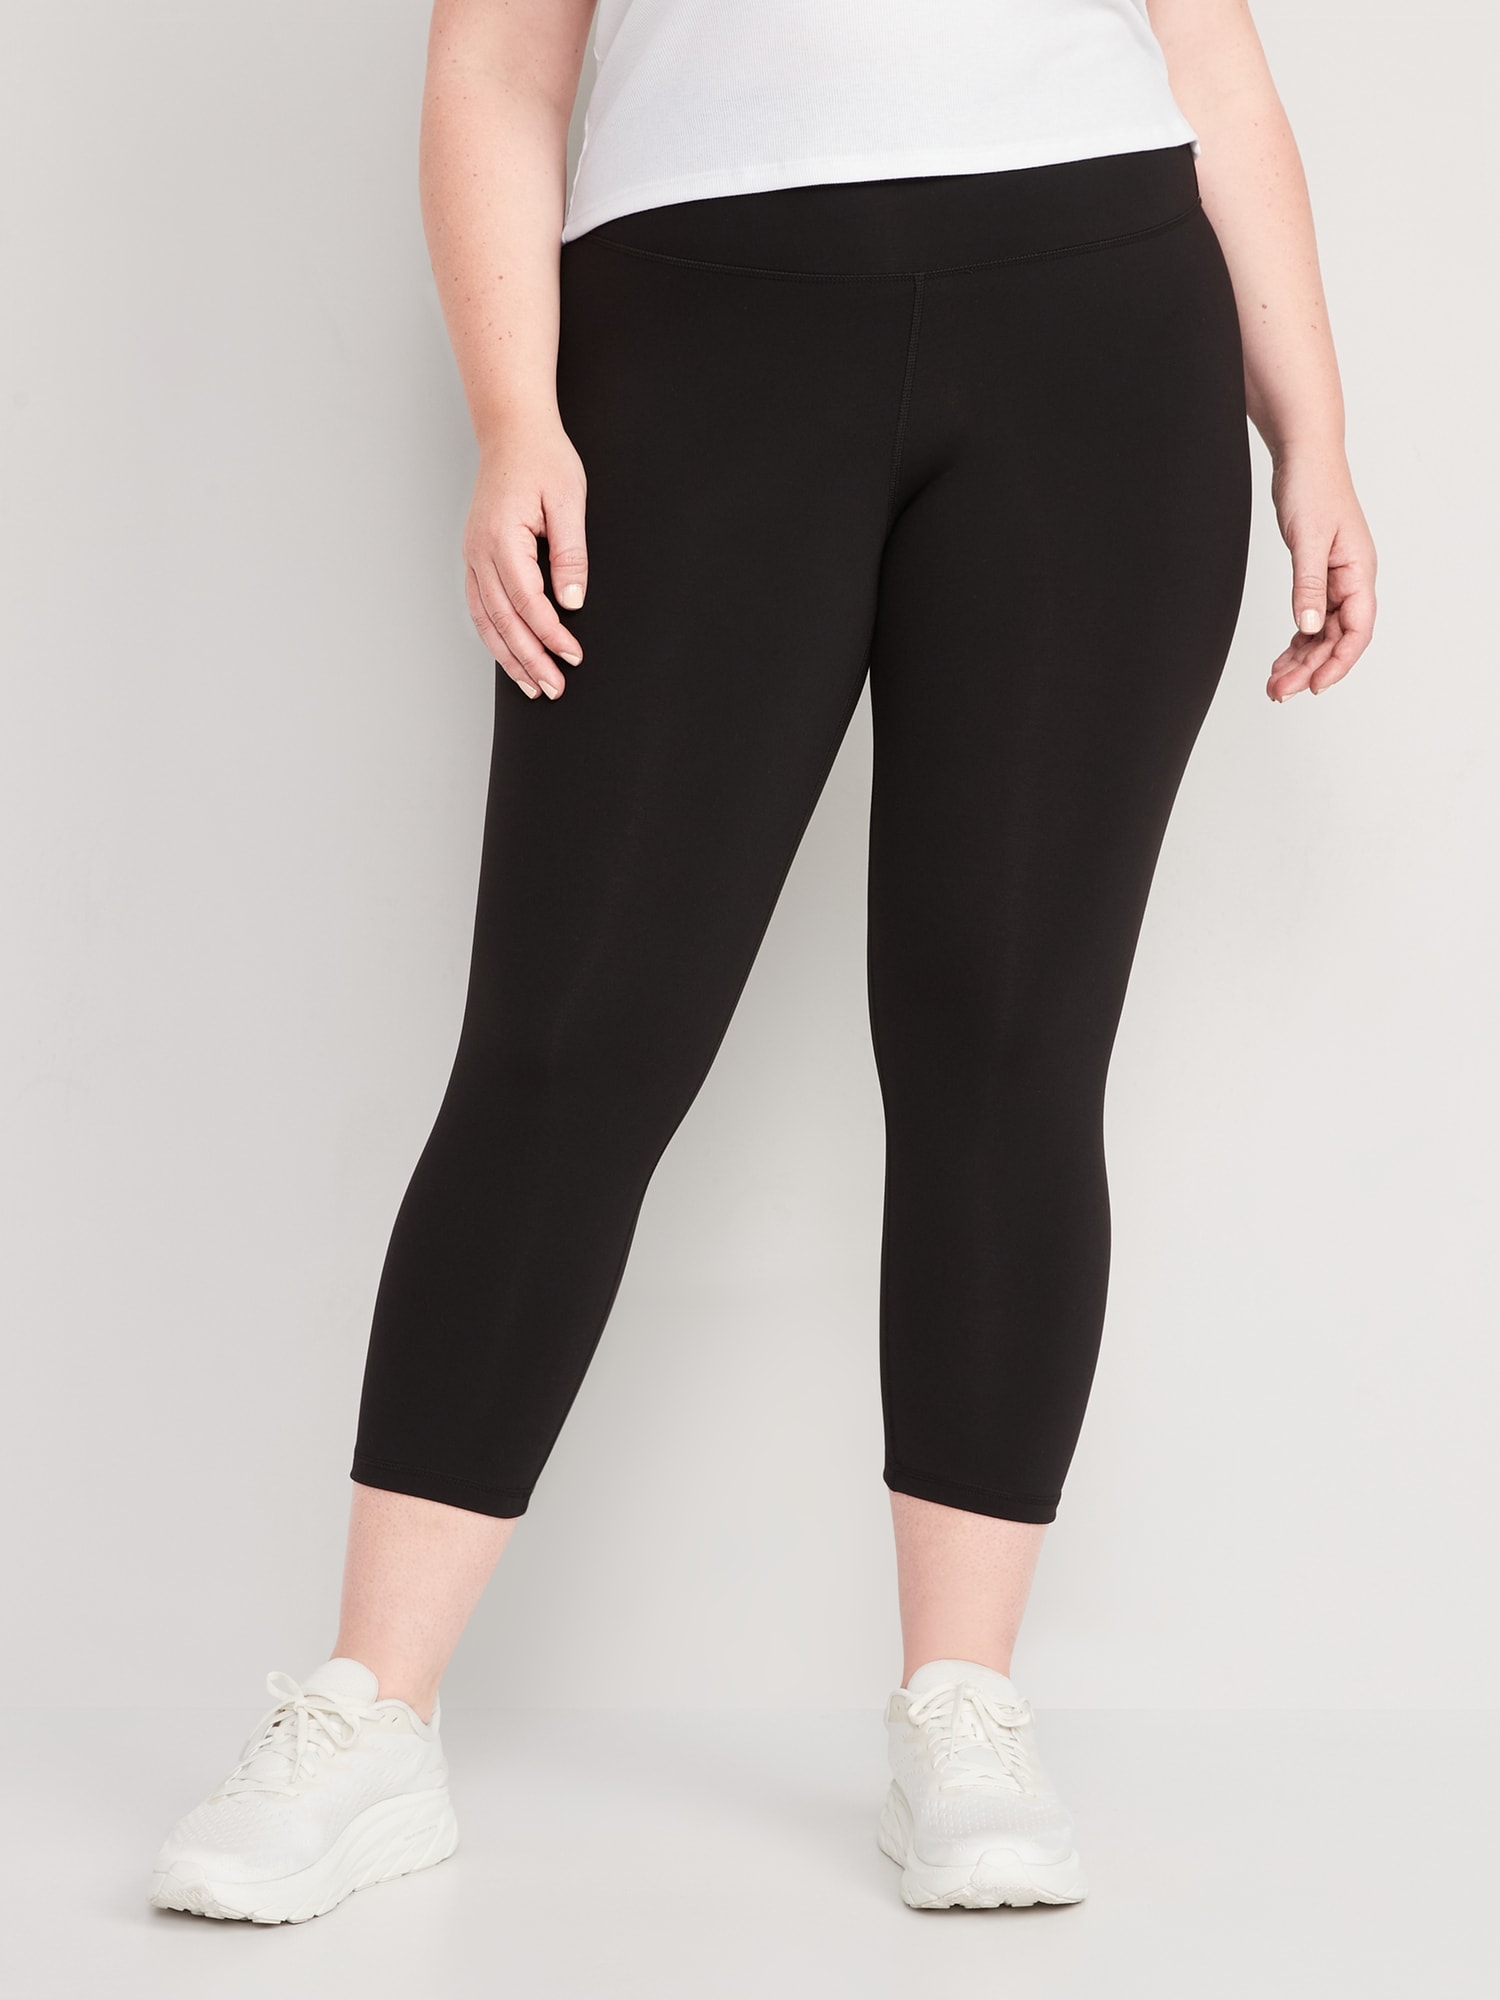 Capri Leggings for Women, Leggings for Women, Leggings with